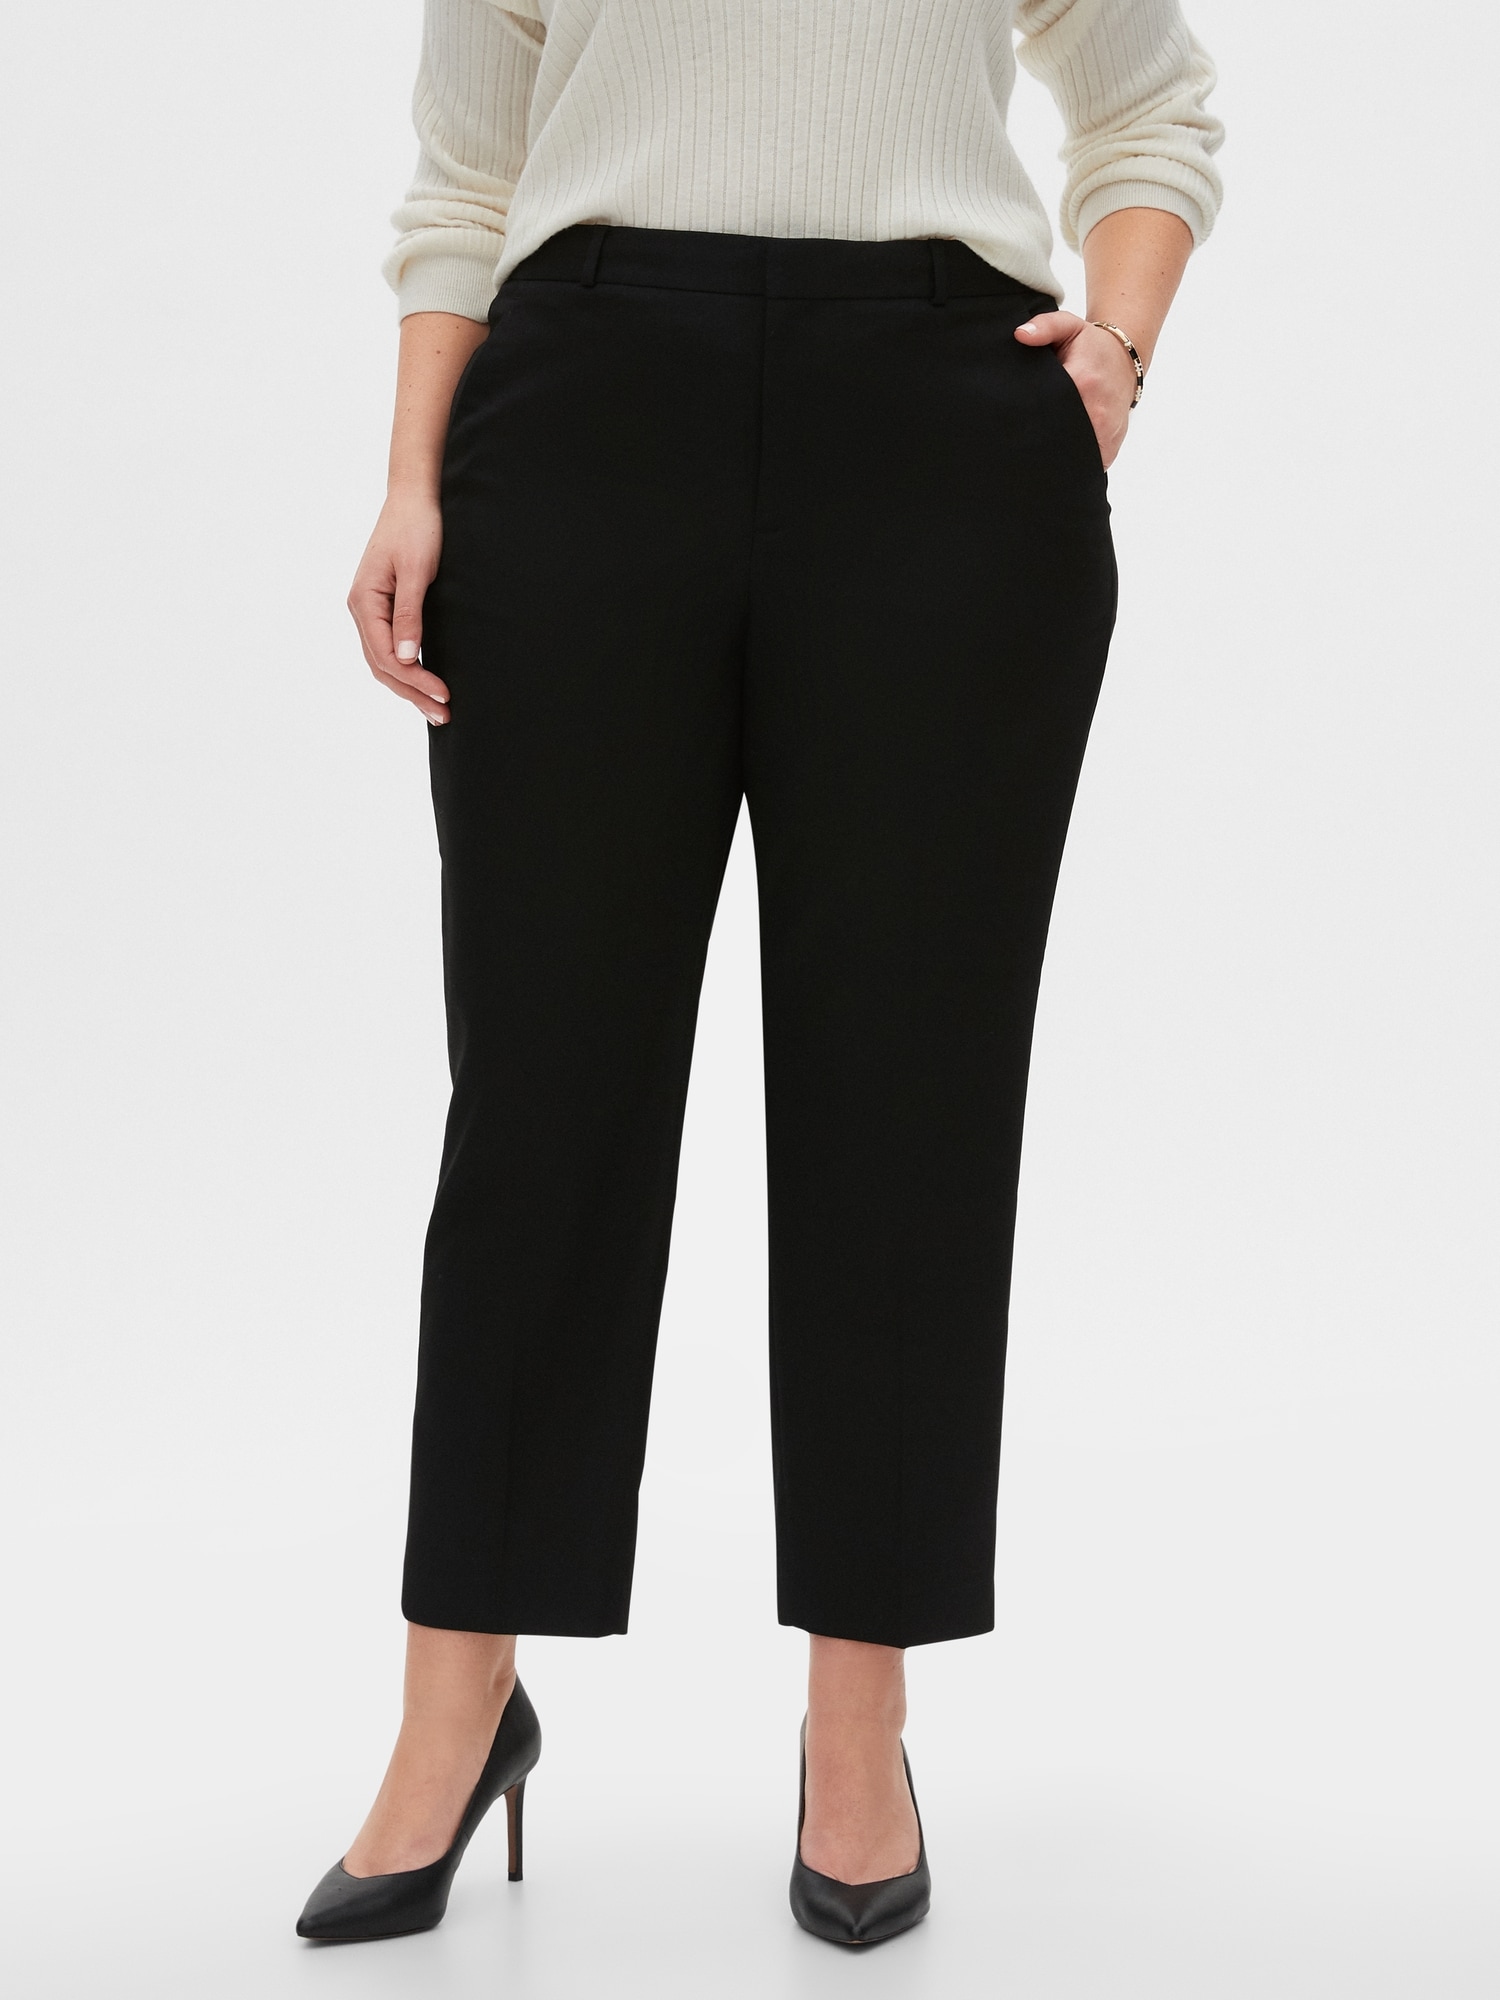 Curvy Avery Black Tailored Ankle Pant | Banana Republic Factory